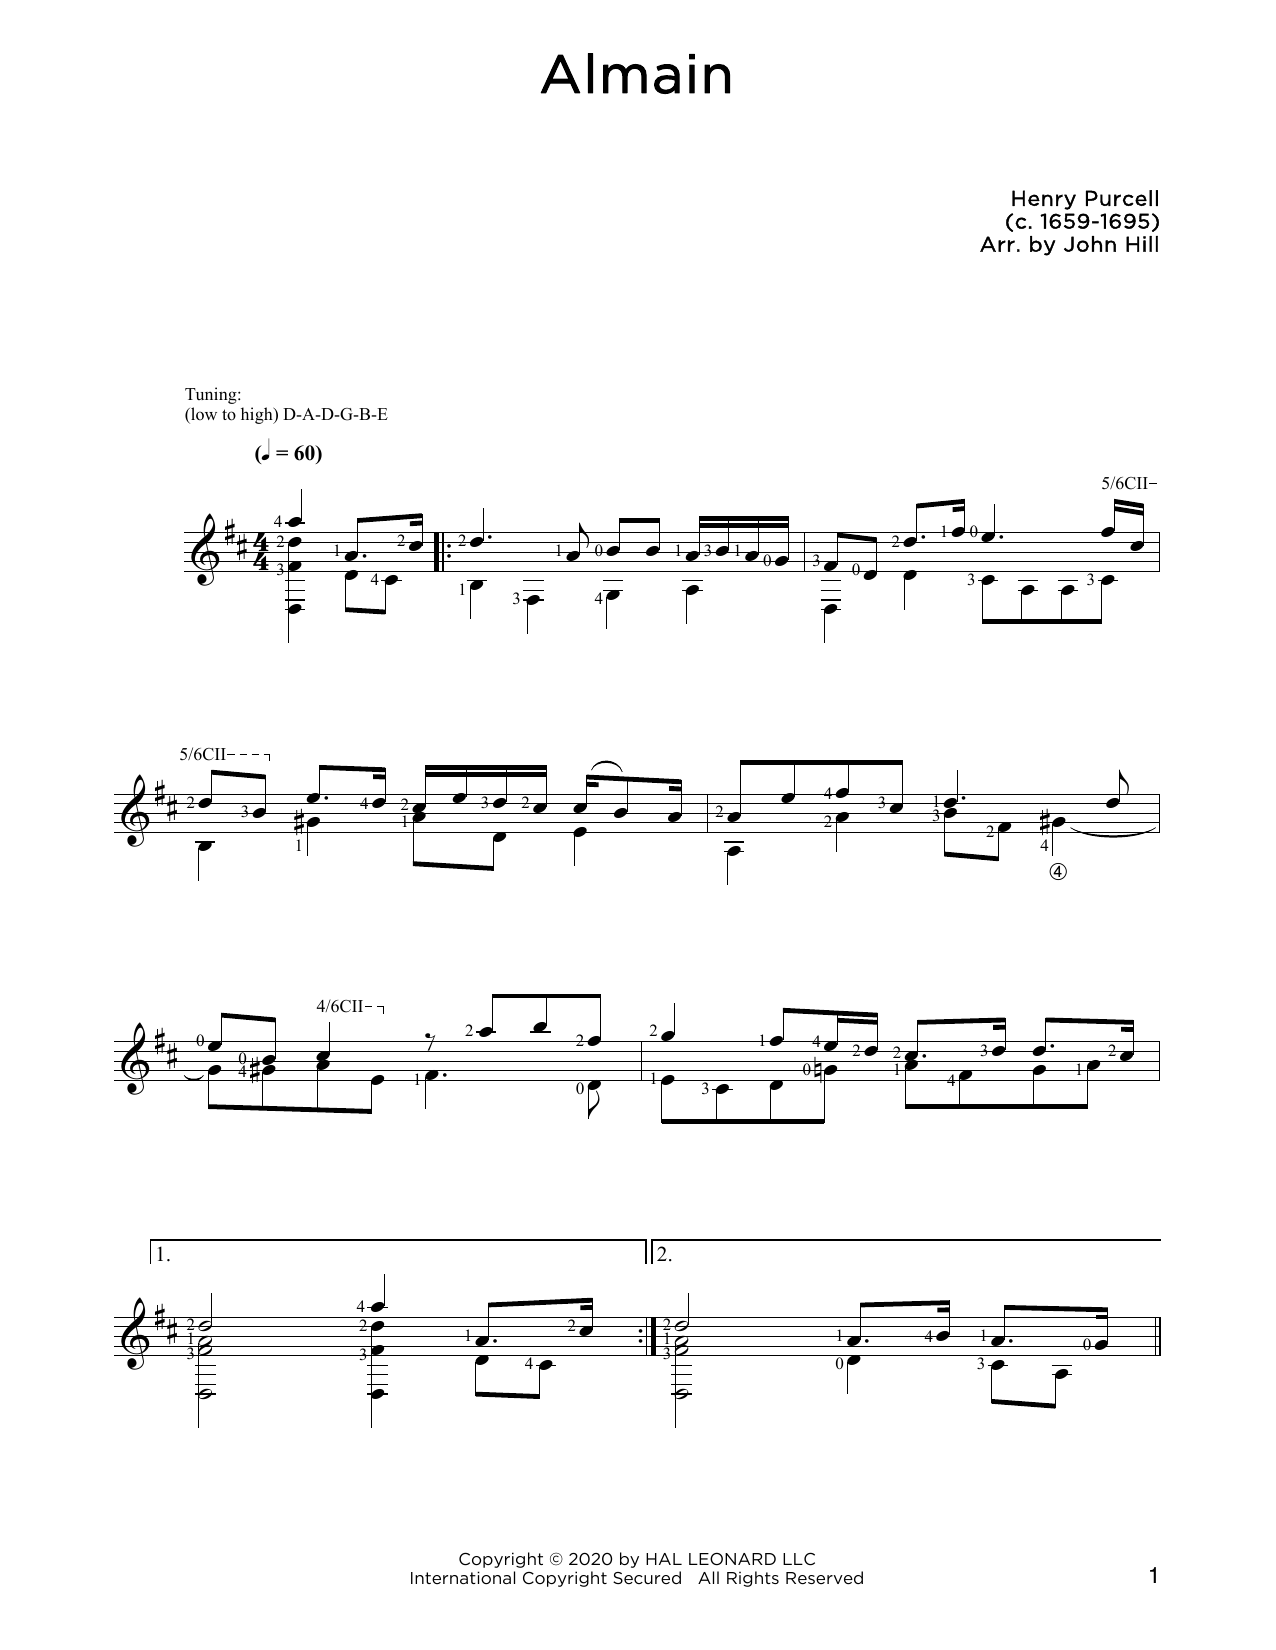 Download Henry Purcell Almain Sheet Music